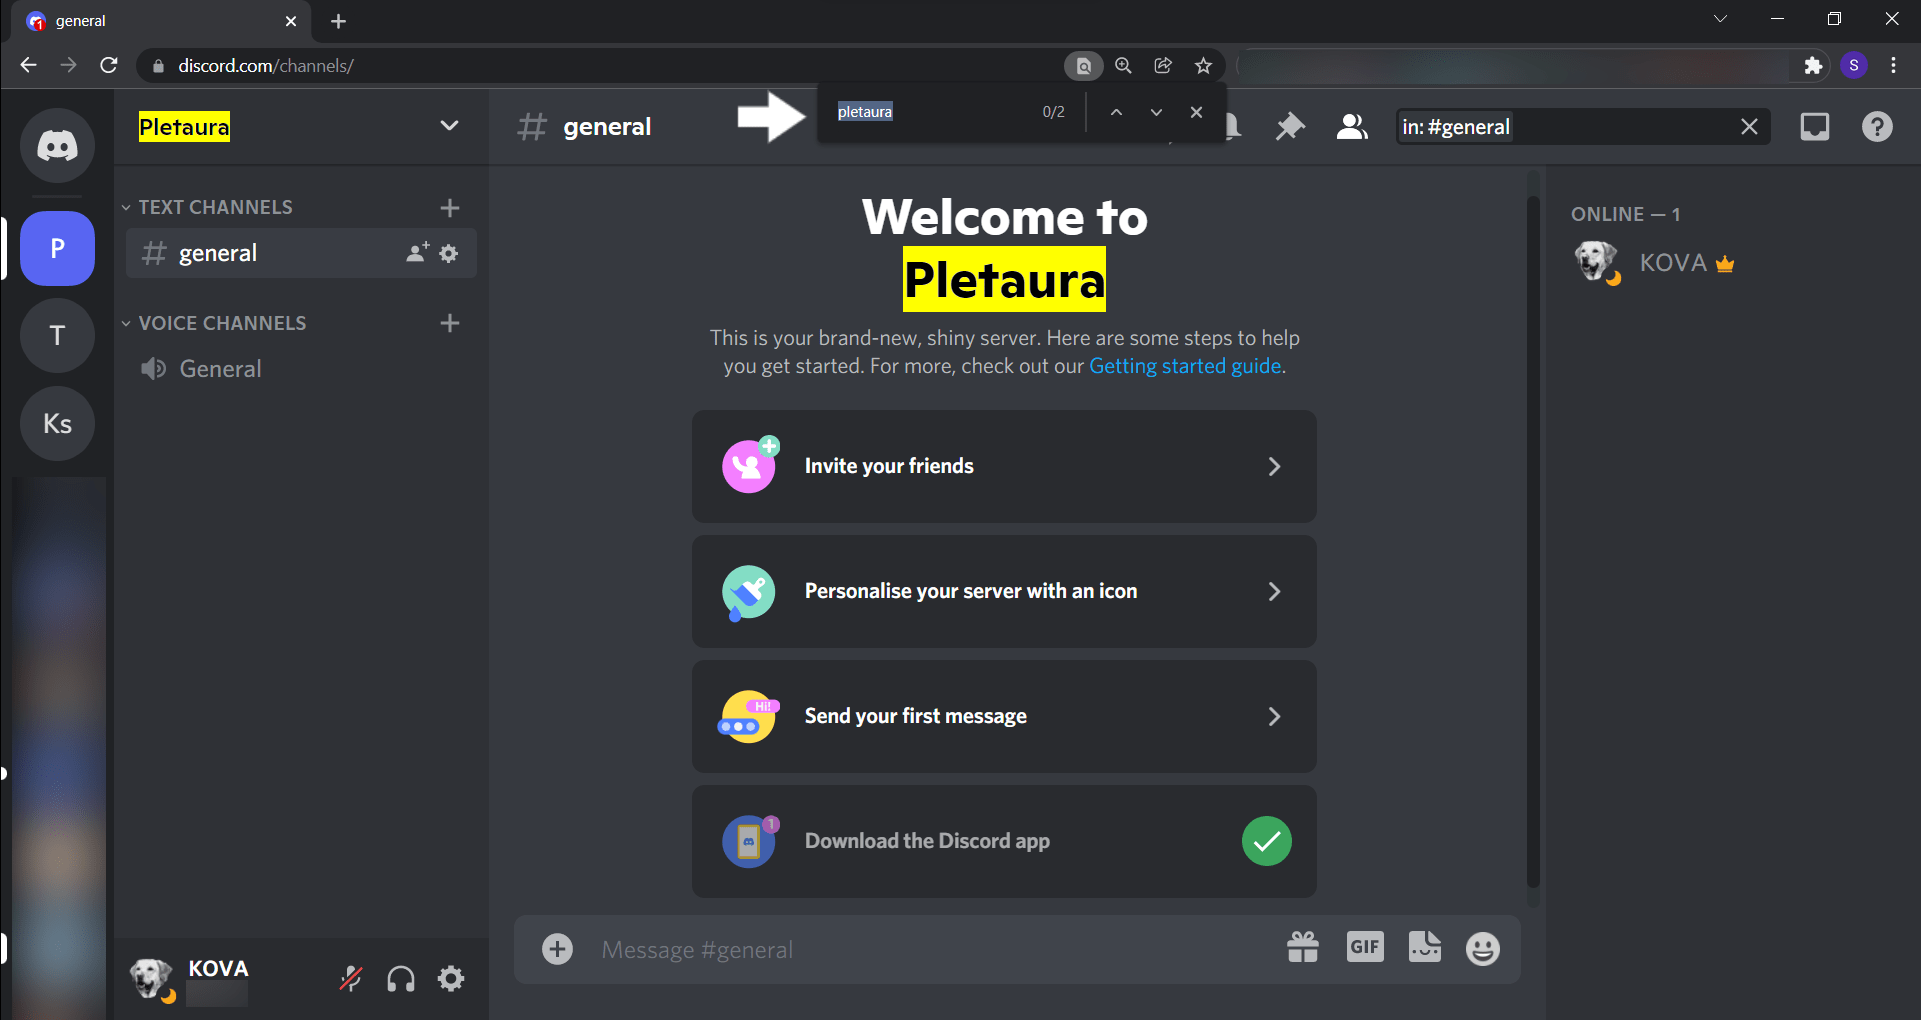 use the web browser's search function if the Discord search bar or function not working or showing no results